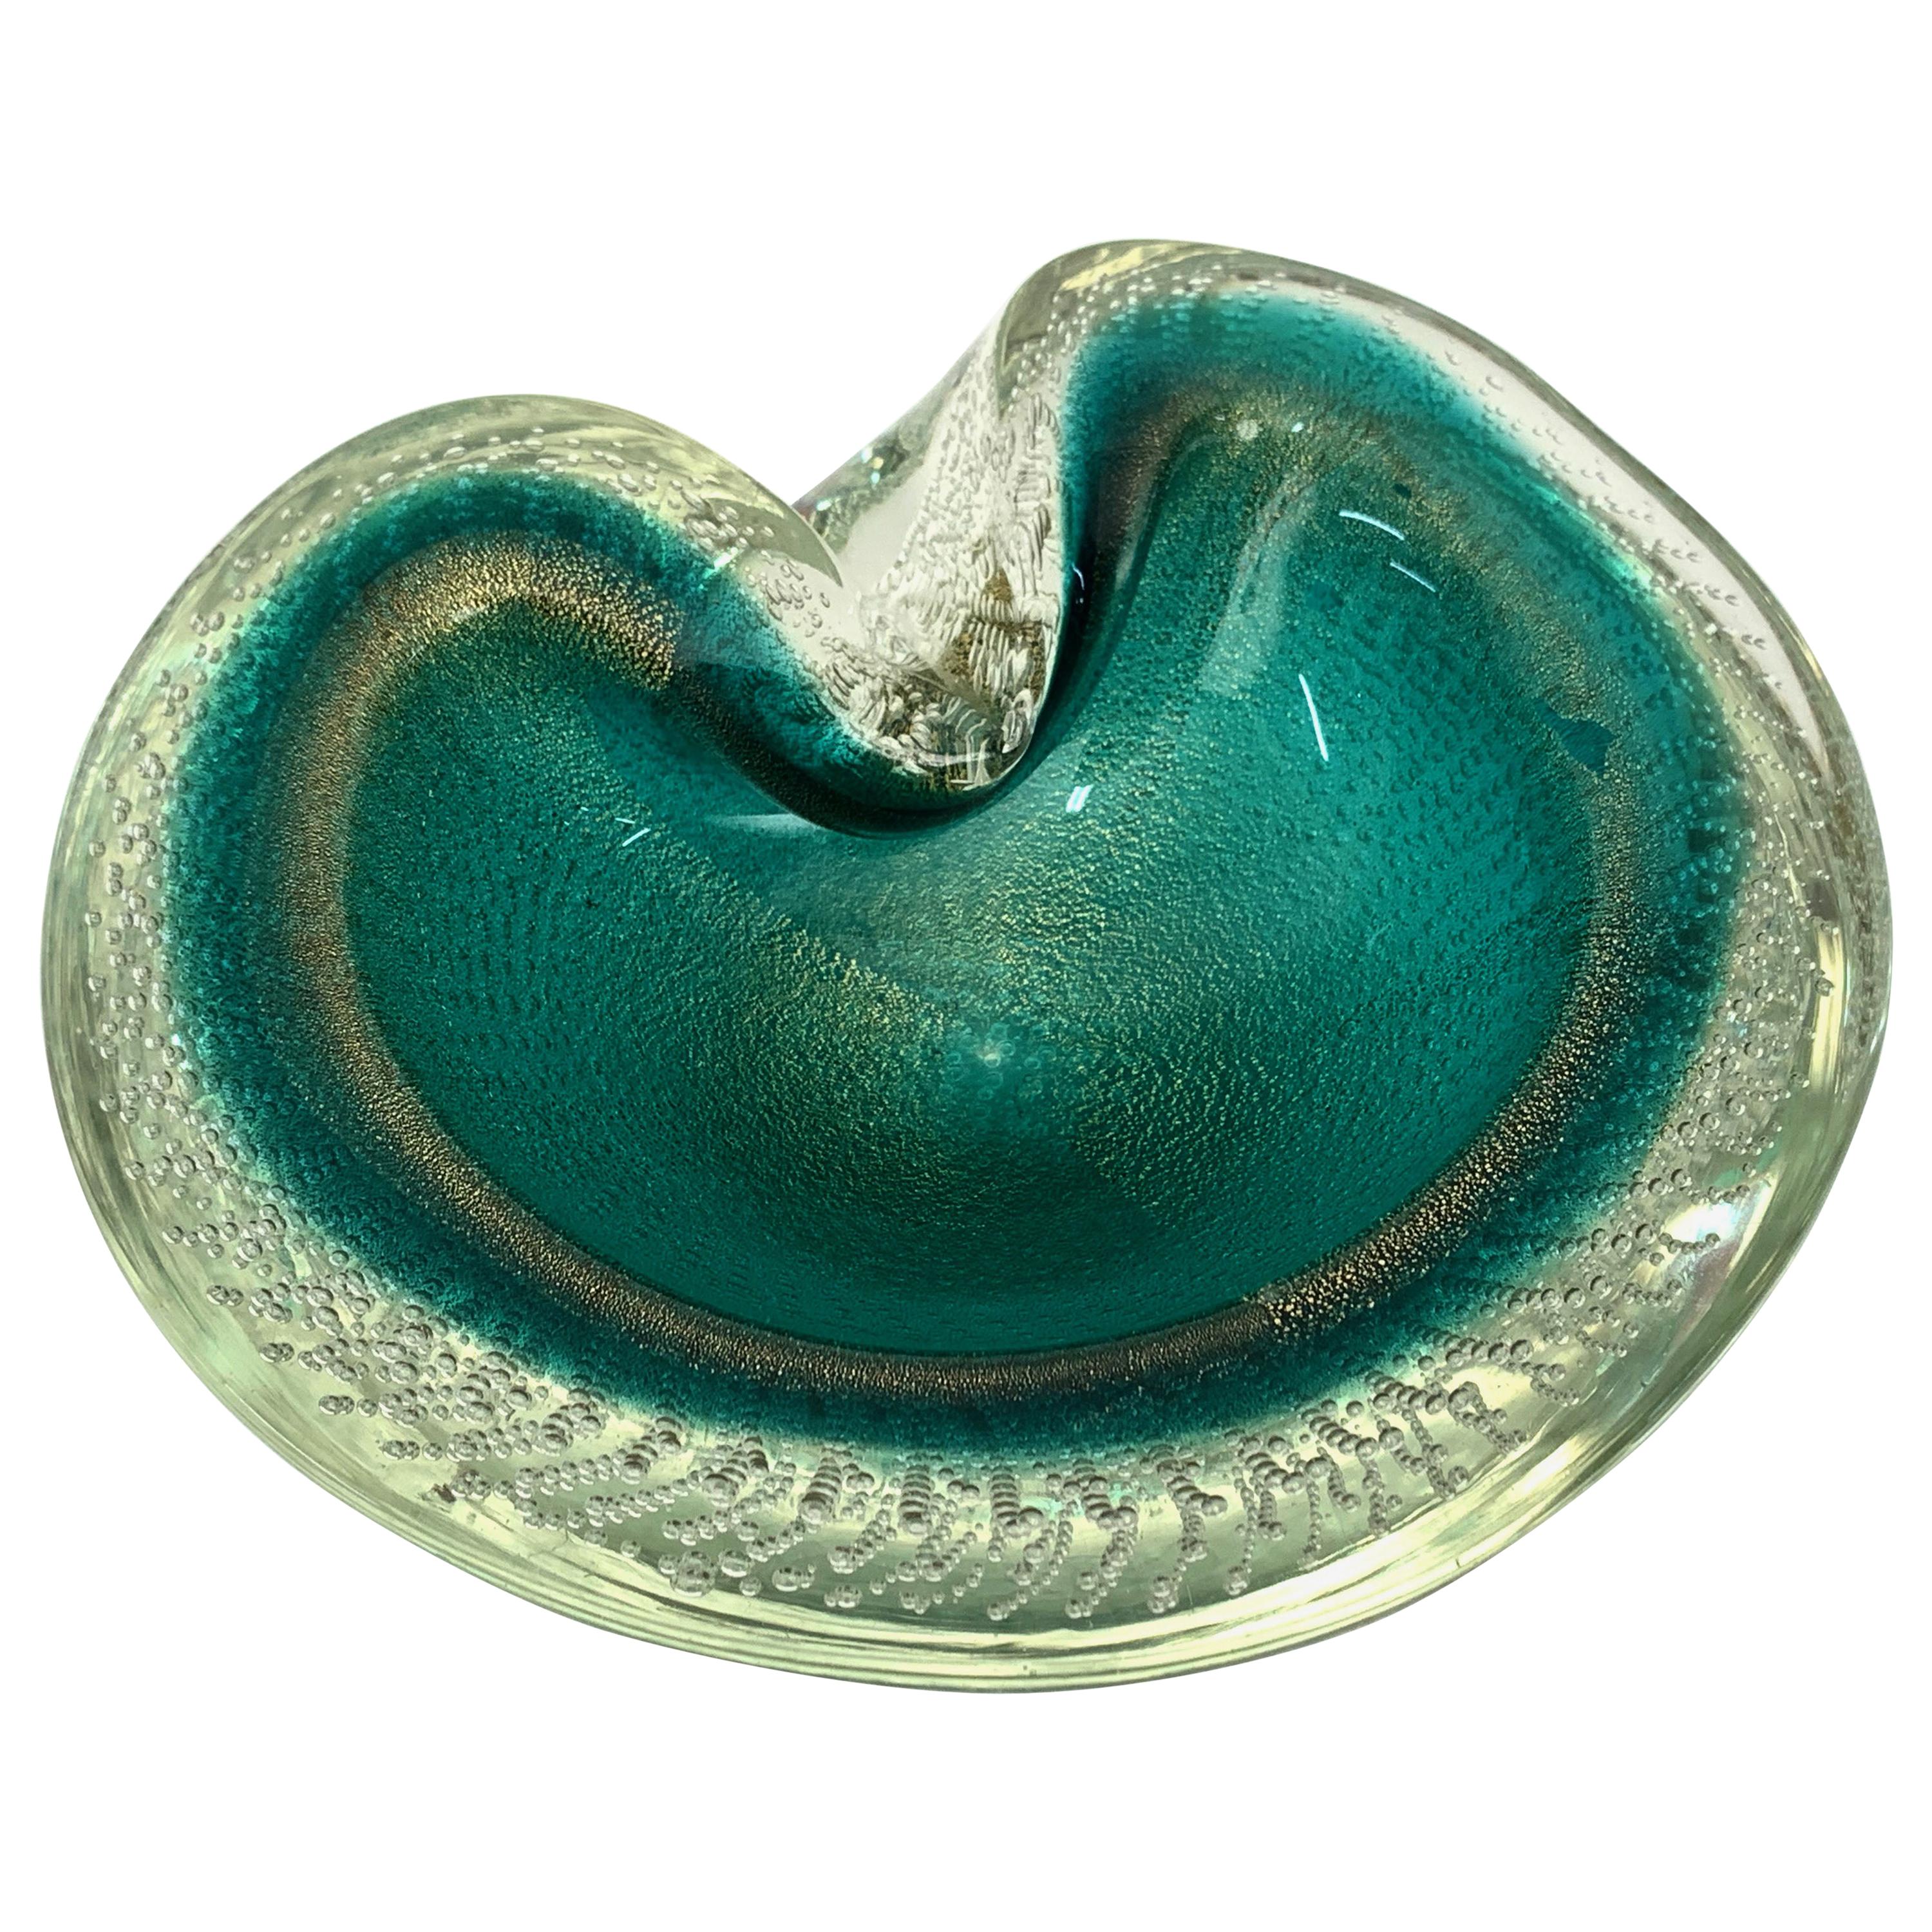 Midcentury Green and Gold "Sommerso Bullicante" Murano Glass Italian Bowl, 1960